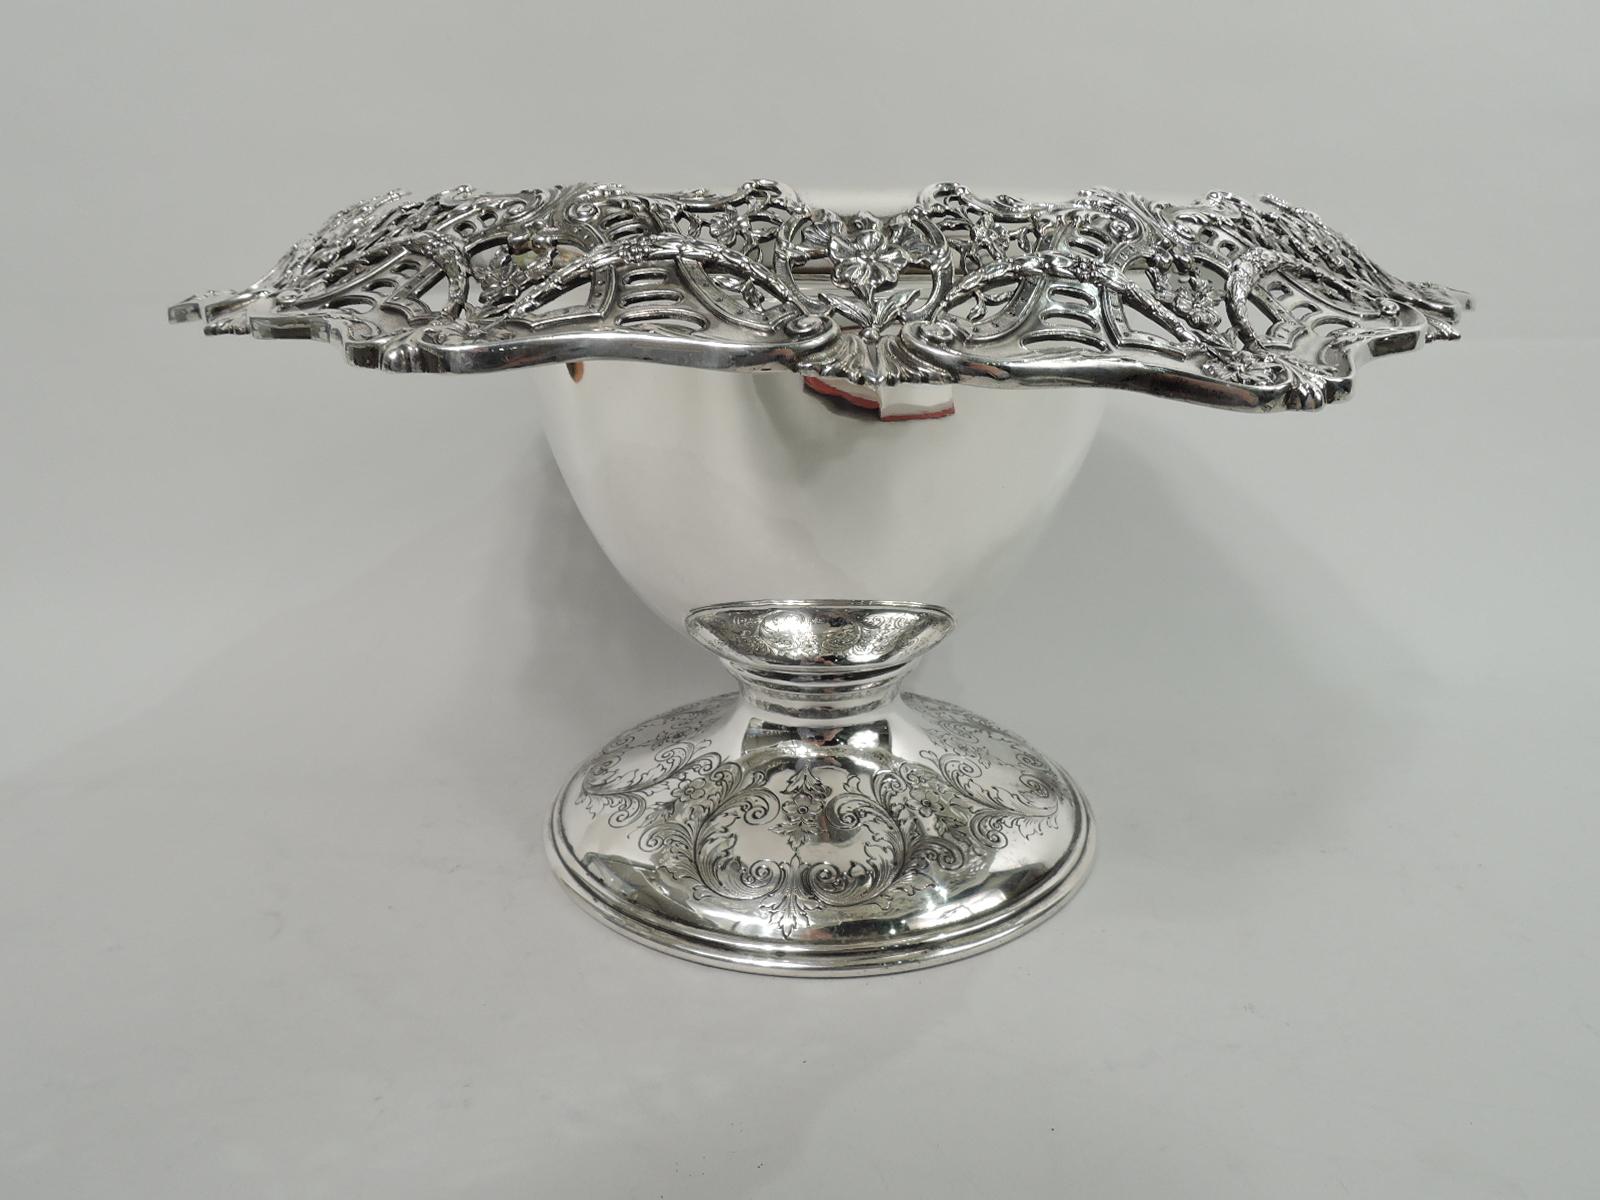 American Edwardian Regency sterling silver centerpiece bowl, ca 1910. Deep and tapering bowl, and turned-down, pierced, and scrolled rim with garlands, leaves, and flower-inset pelta shields. Foot raised with engraved leafing scrolls and flowers.